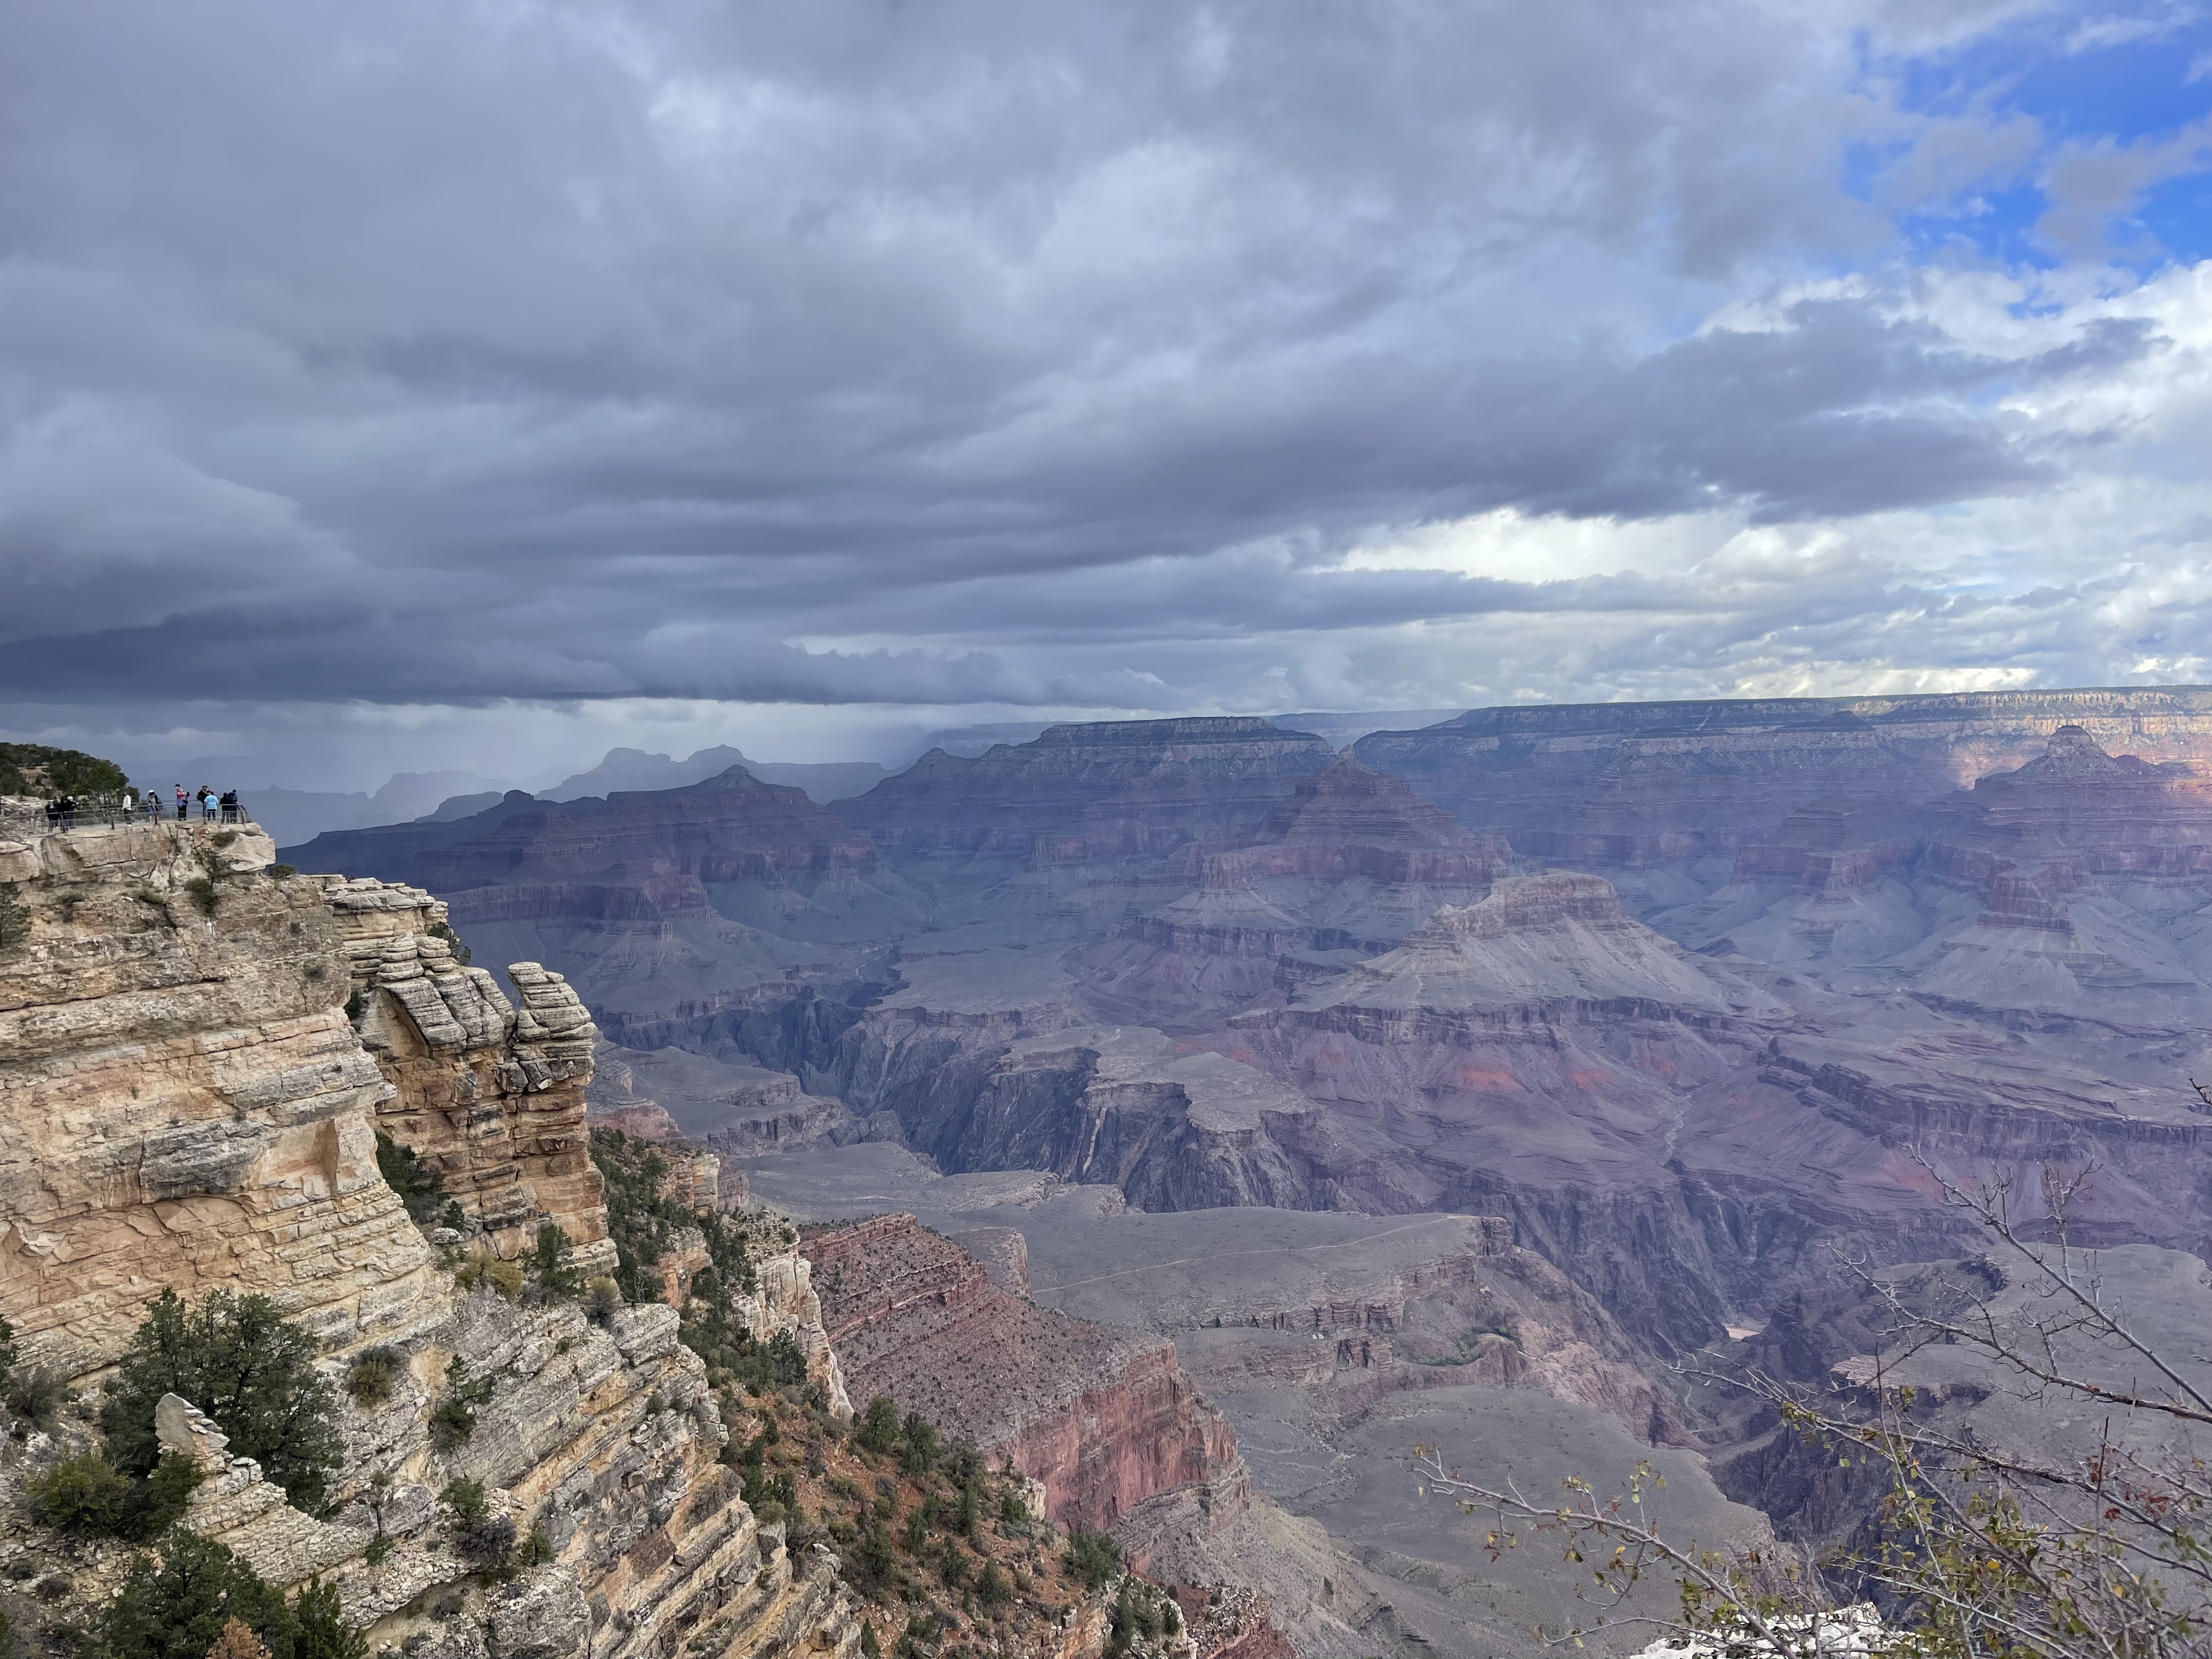 Storm clouds gather above the Grand Canyon.